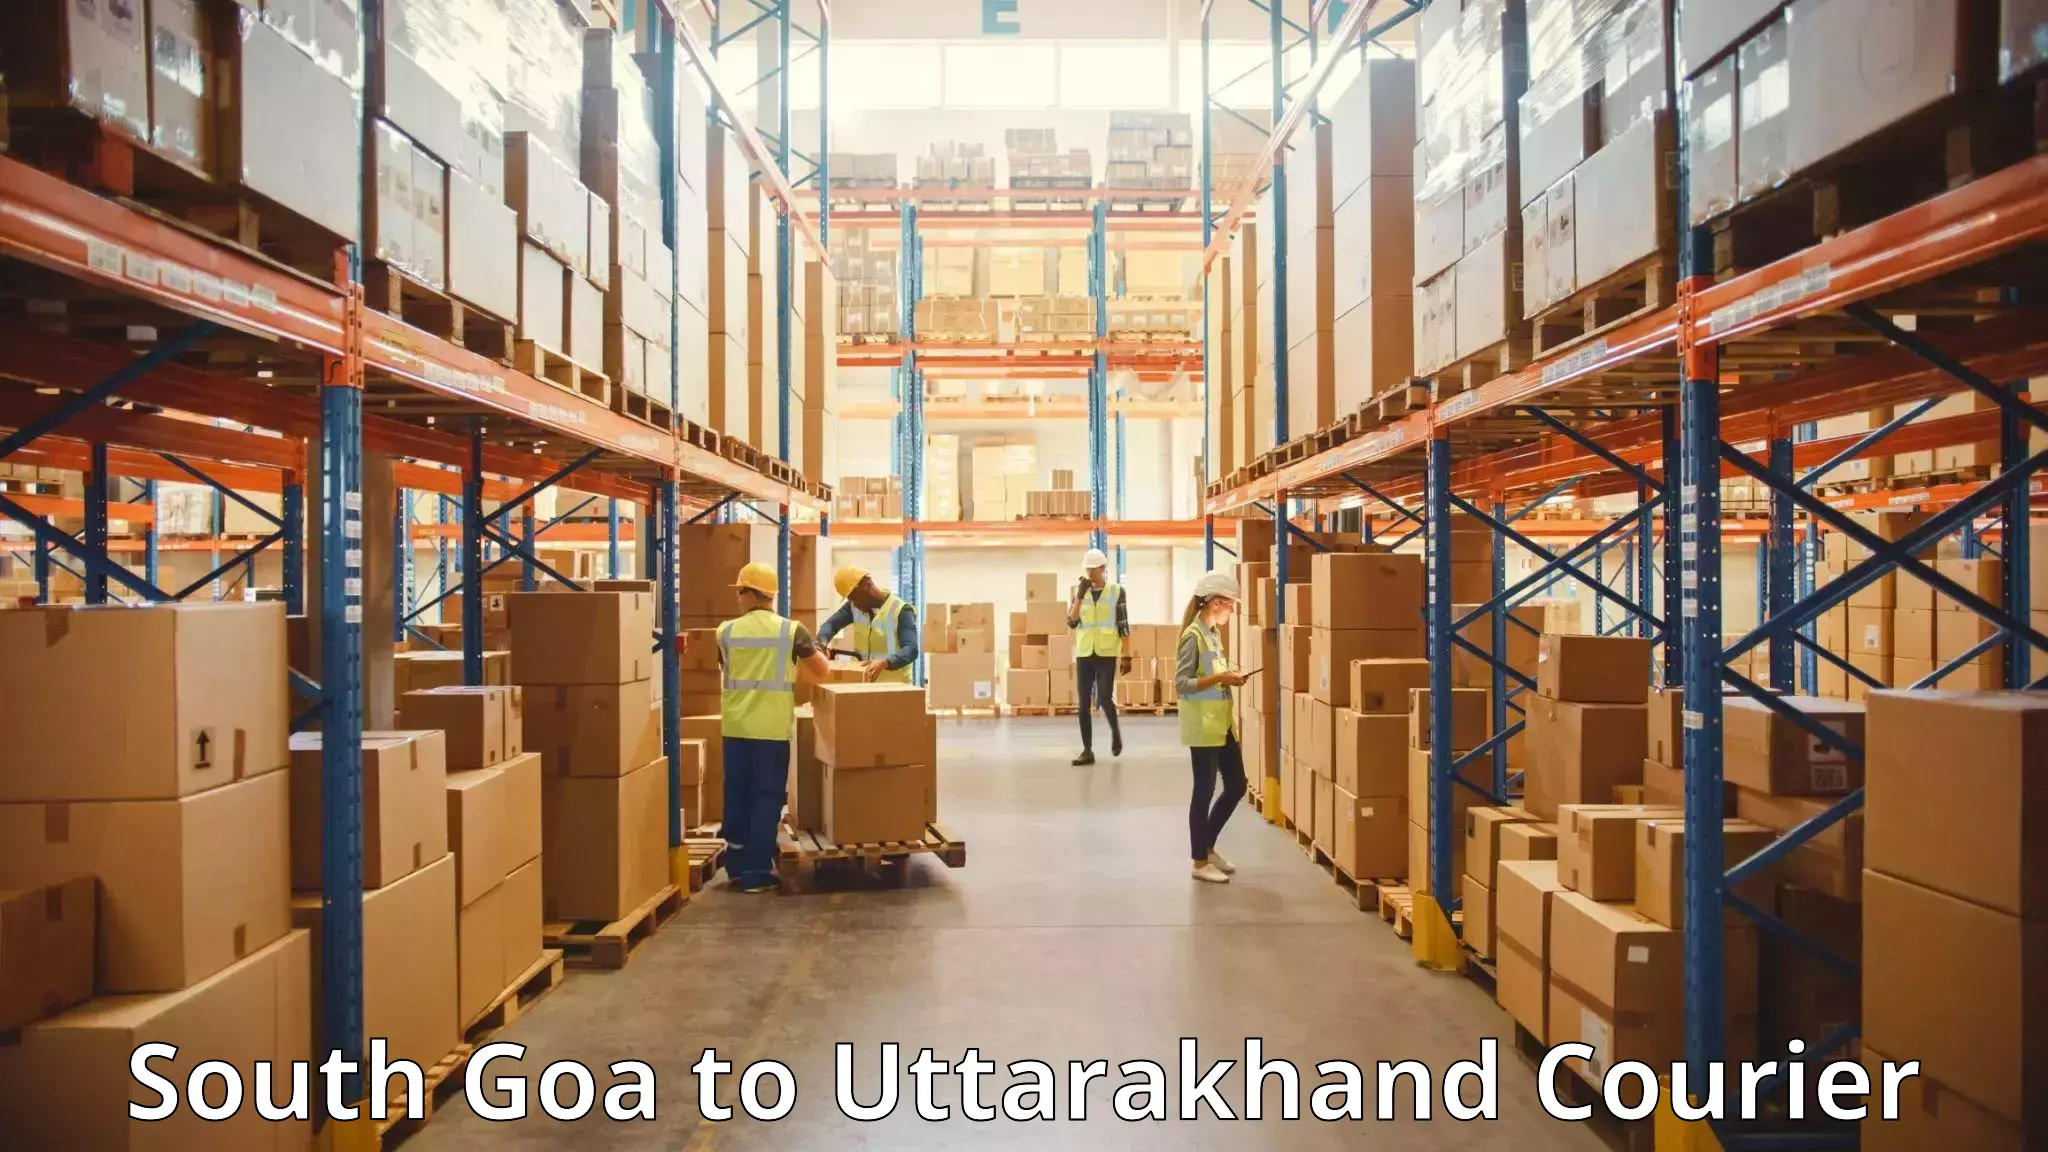 Online luggage shipping booking South Goa to Rudraprayag